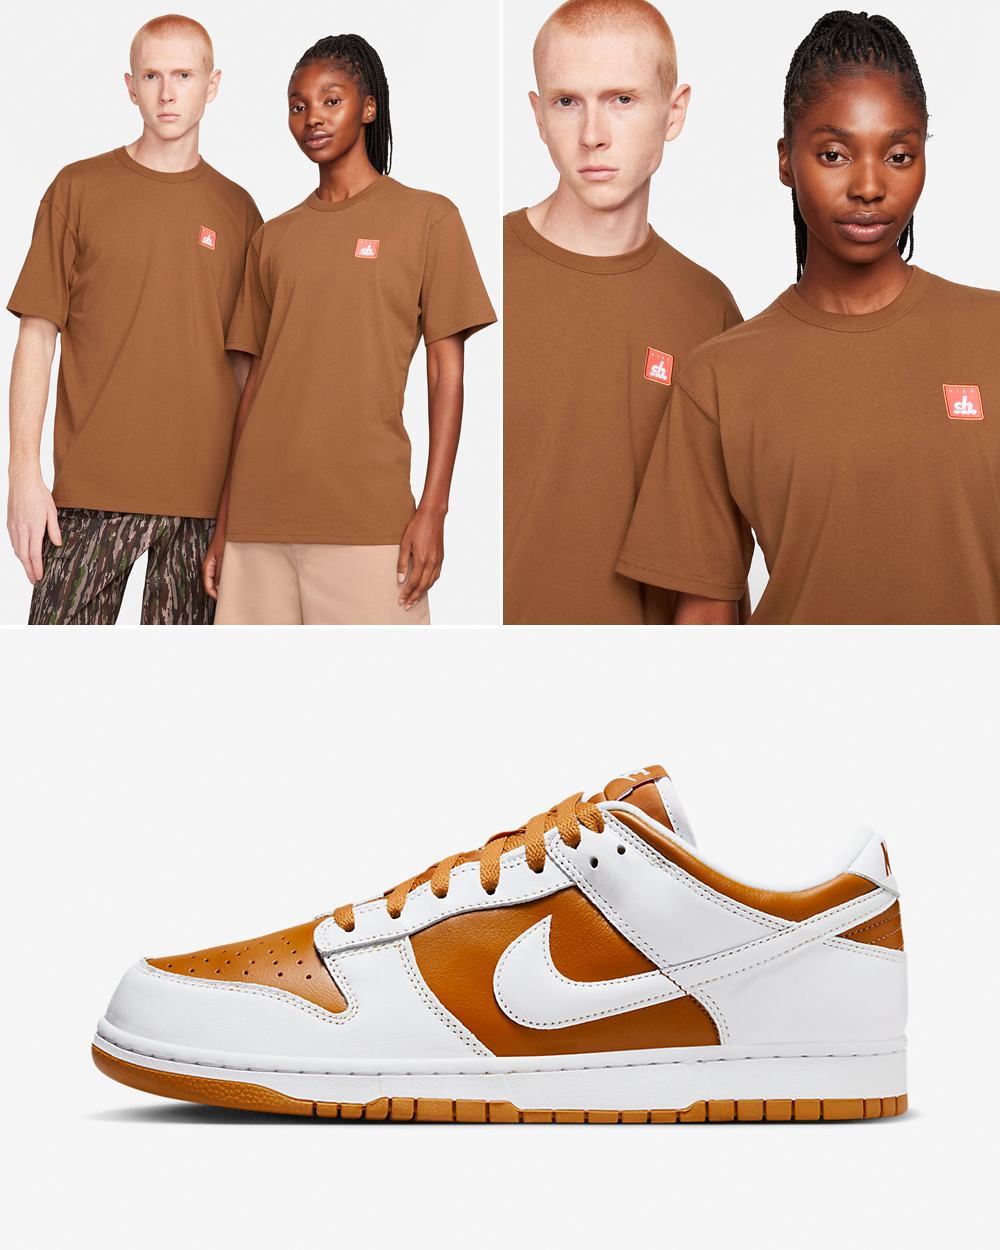 Nike-Dunk-Low-Reverse-Curry-T-Shirt-Matching-Outfit